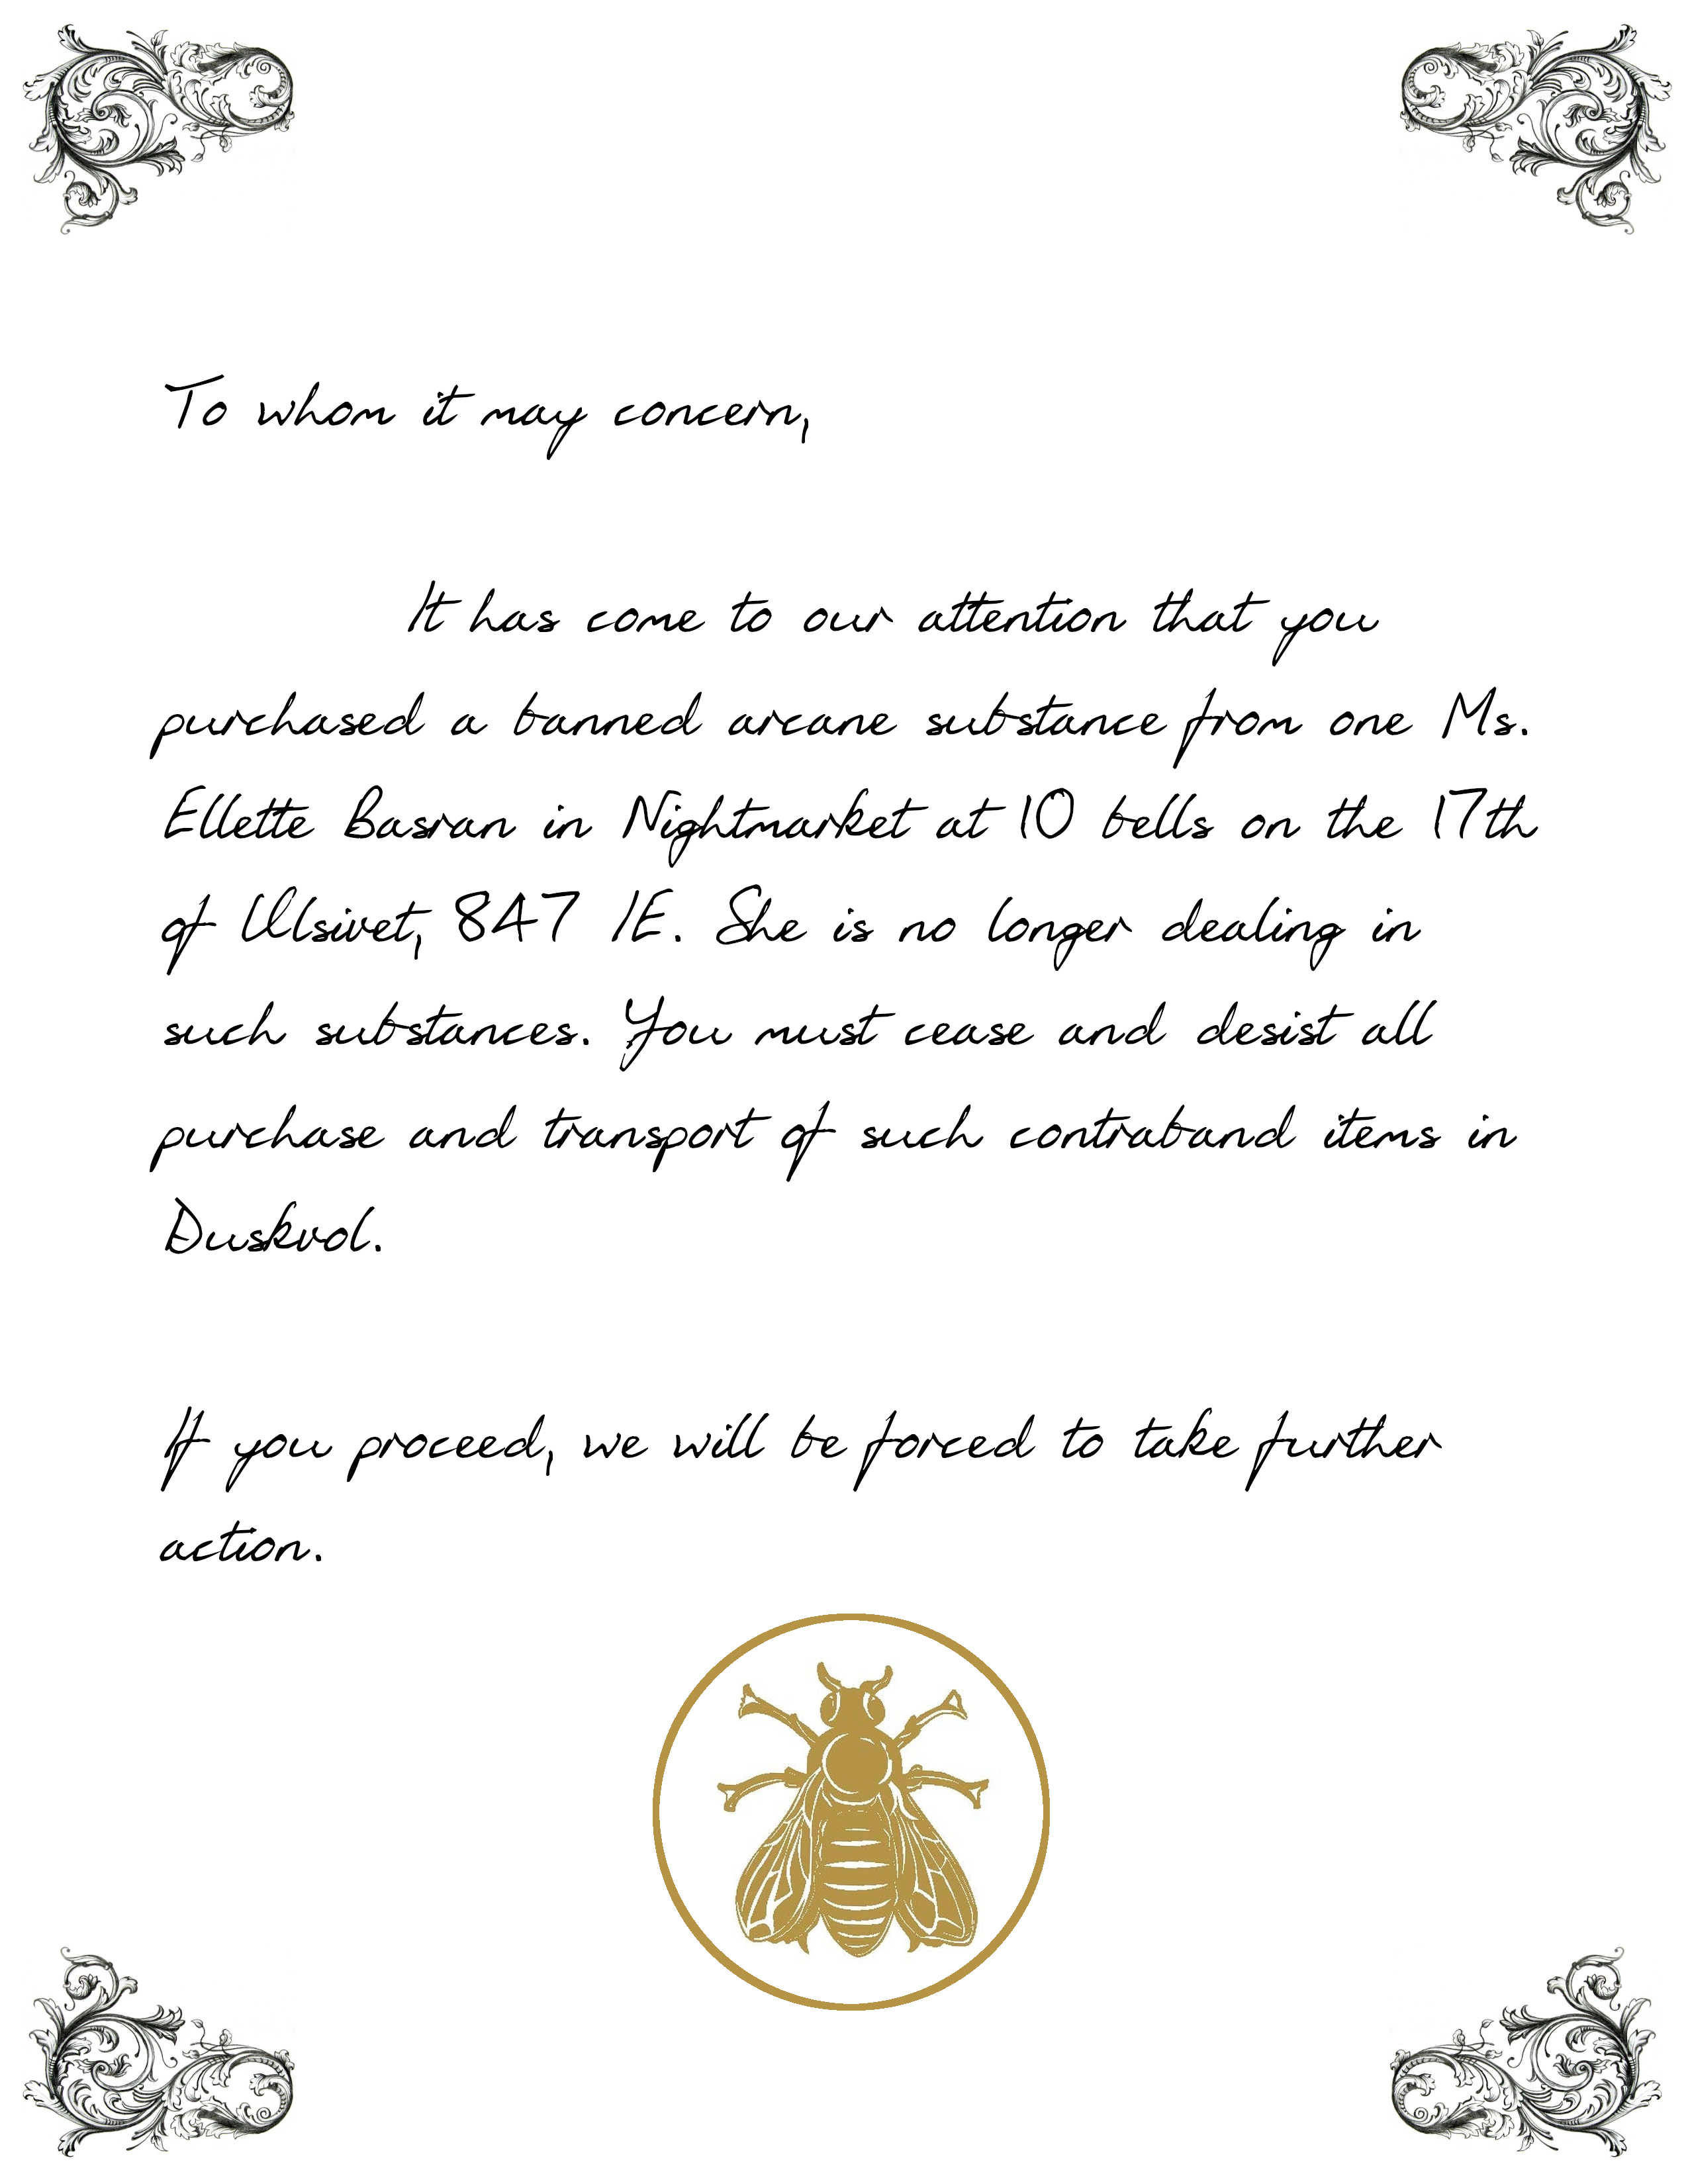 A letter from the Hive